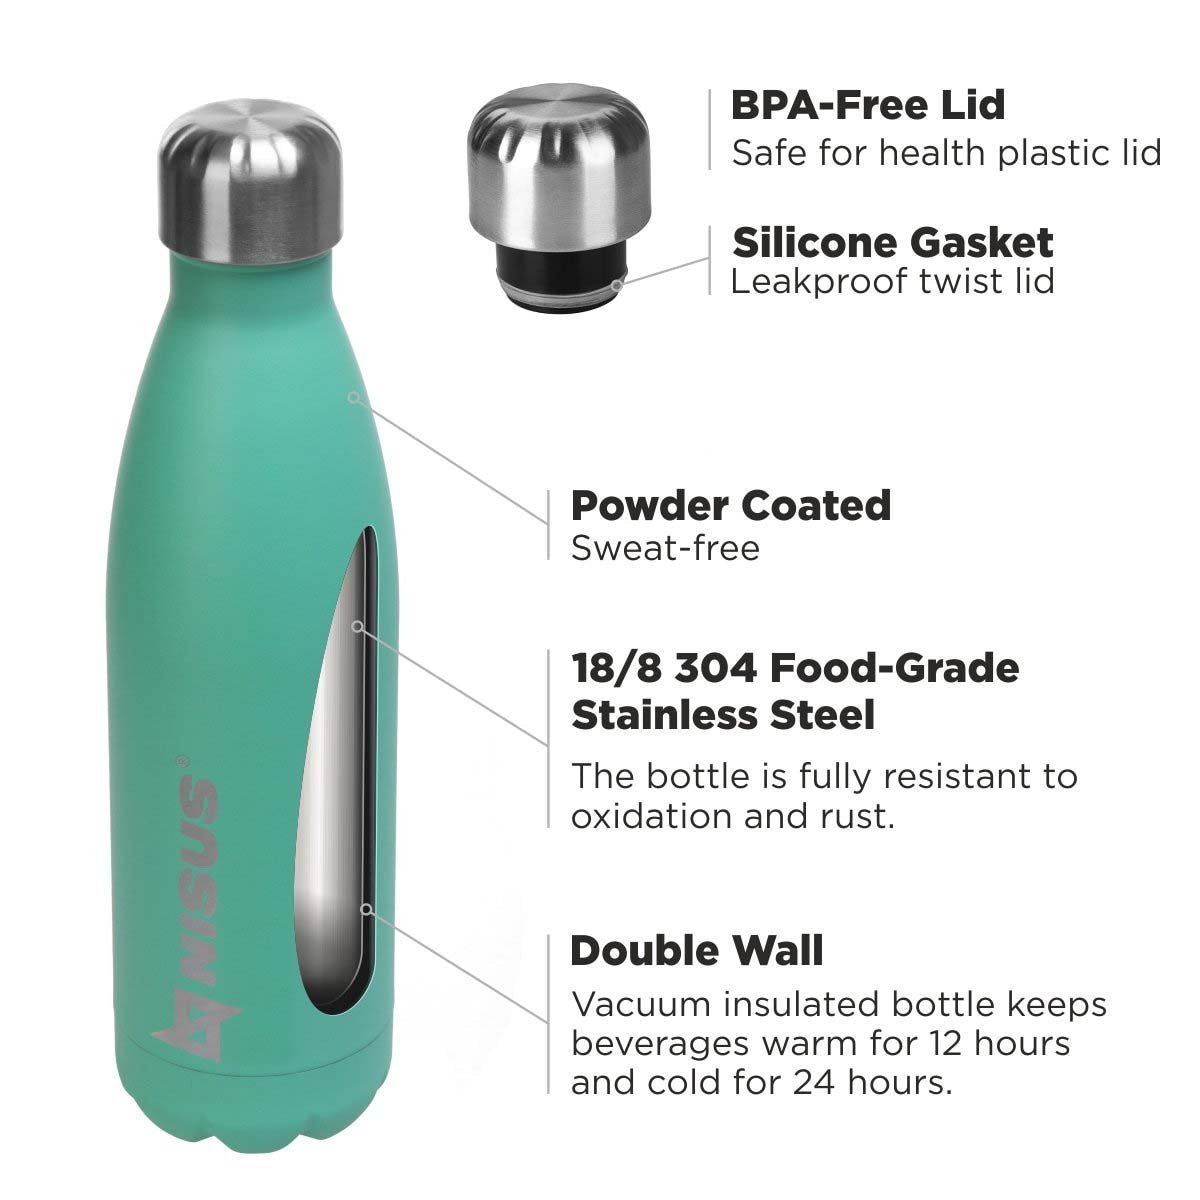 Stainless Steel Insulated Twist Top Water Bottle, 17 oz features a BPA-free teist top lid with a silicone gasket. I's powder coated, and made of double wall 18/8 304 food grade stainless steel